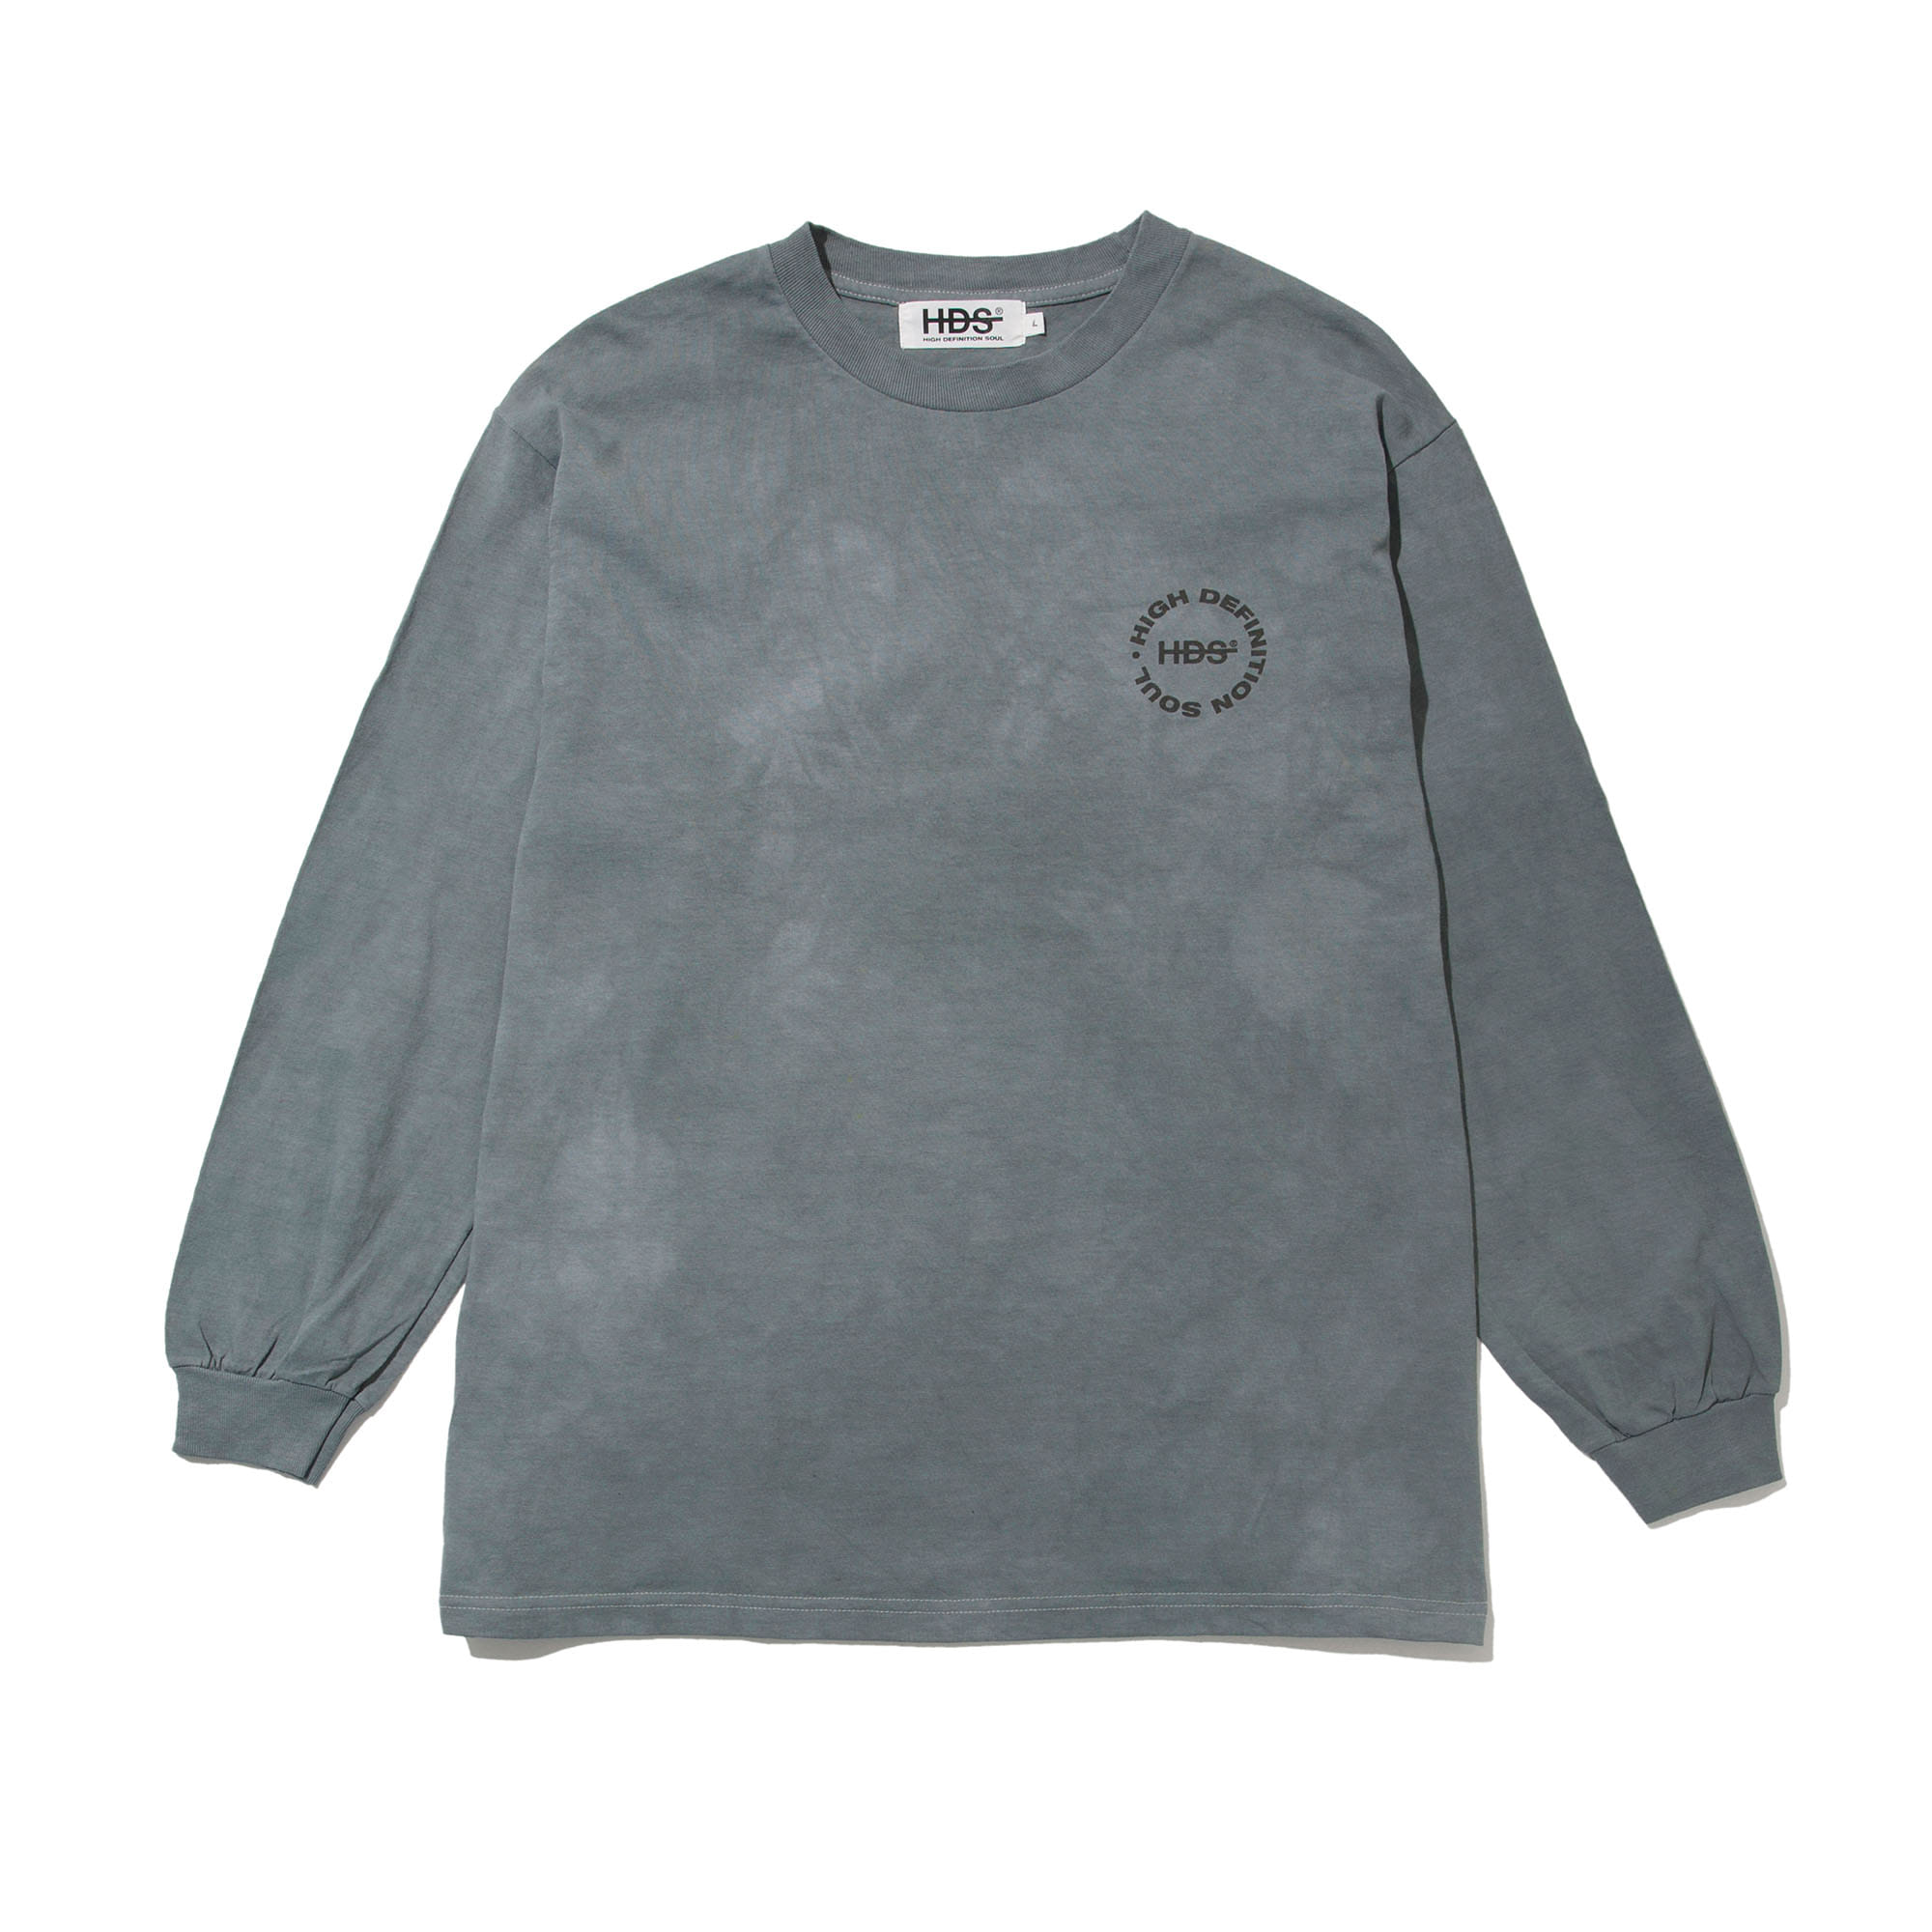 CL OVERDYED LS TEE - CHARCOAL